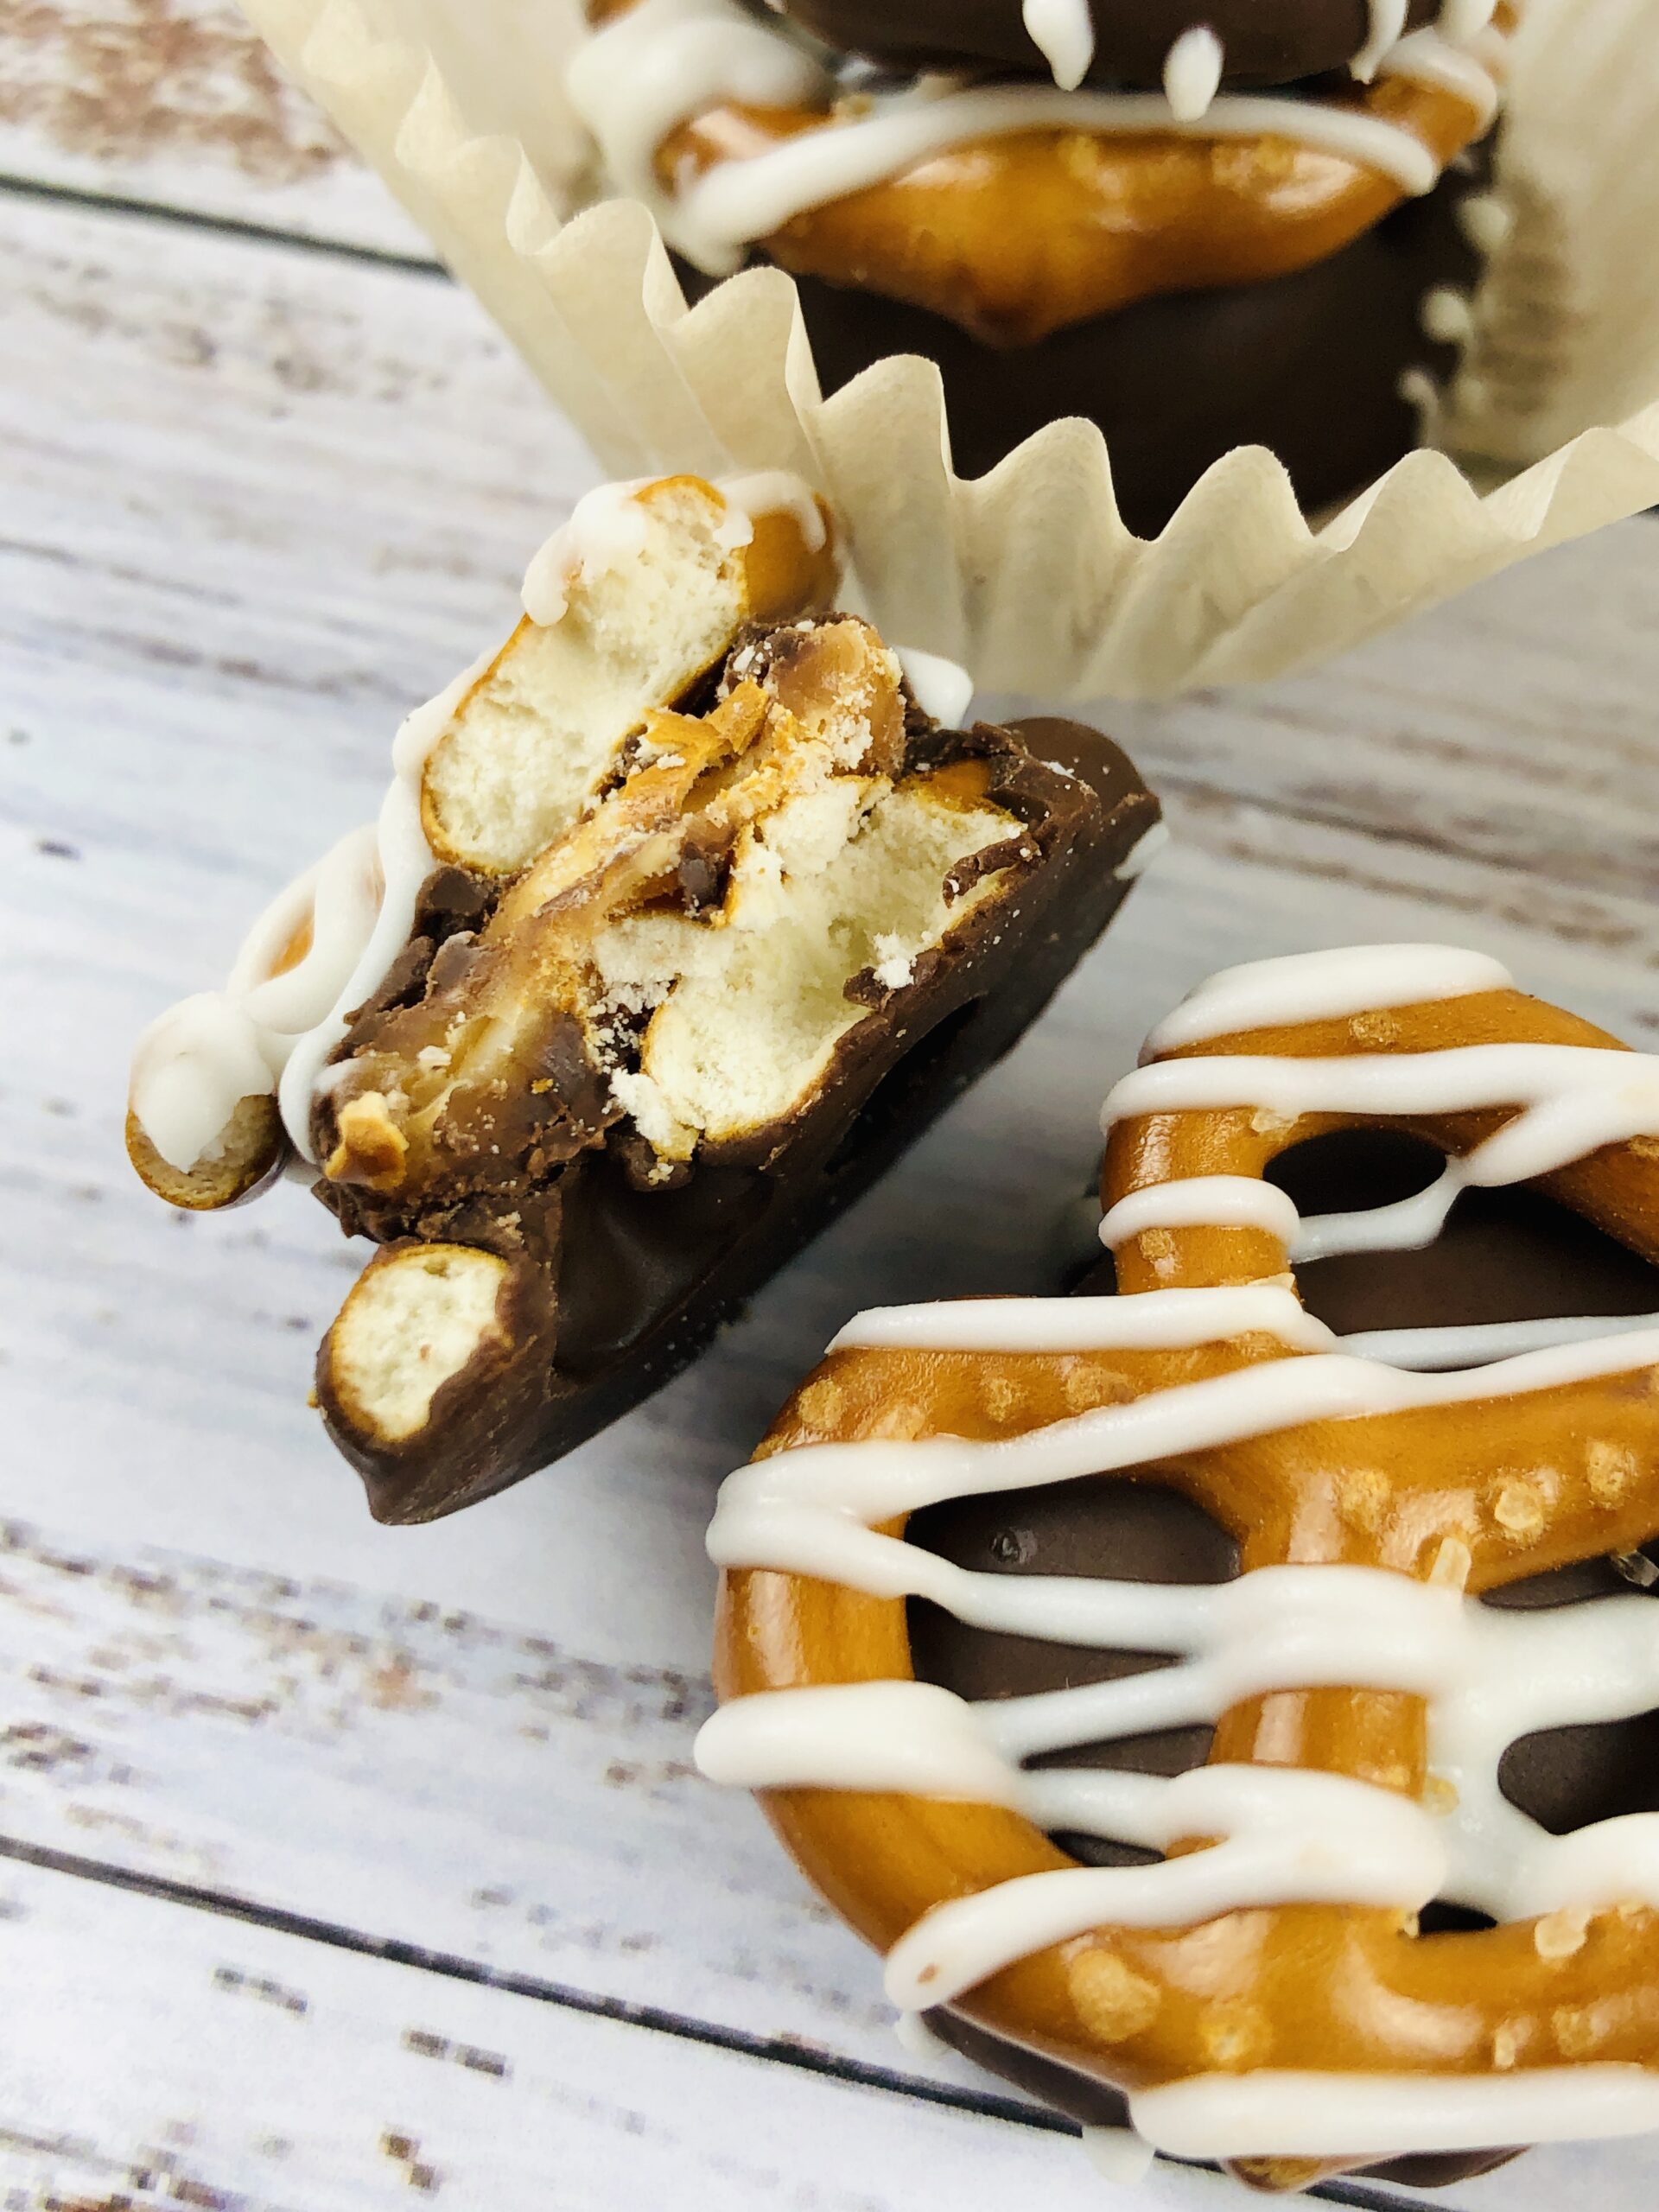 Caramel Pretzels with Chocolate in a little serving cup.